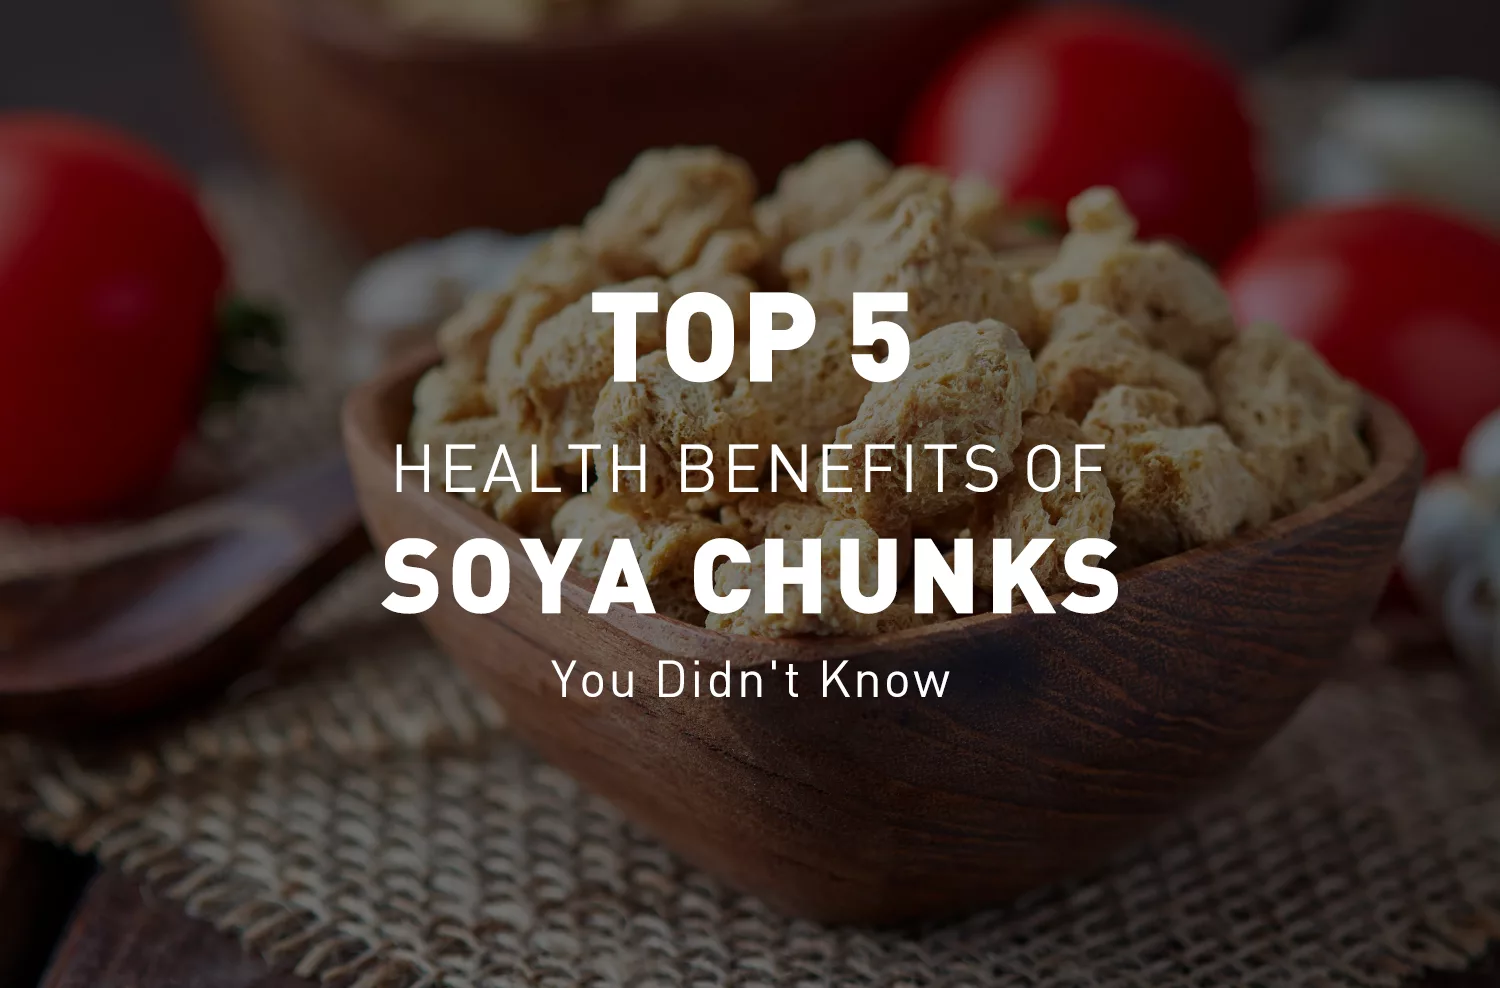 Top 5 Health Benefits of Soya Chunks You Didn't Know